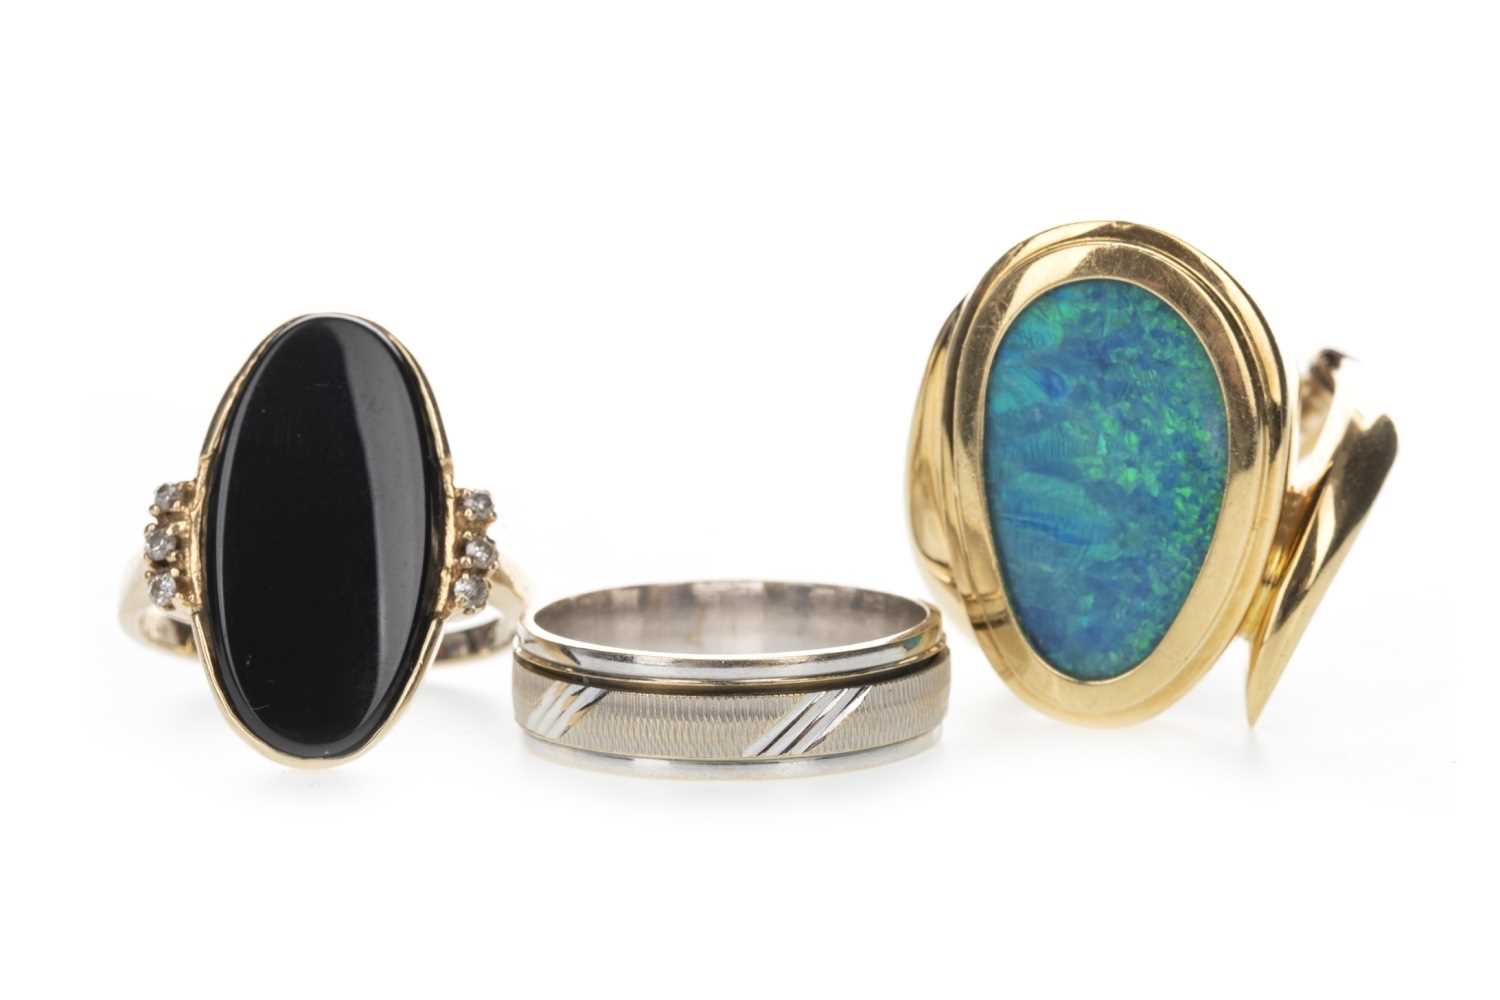 Lot 403 - AN OPAL DOUBLET RING, BLACK HARDSTONE RING AND A WEDDING BAND